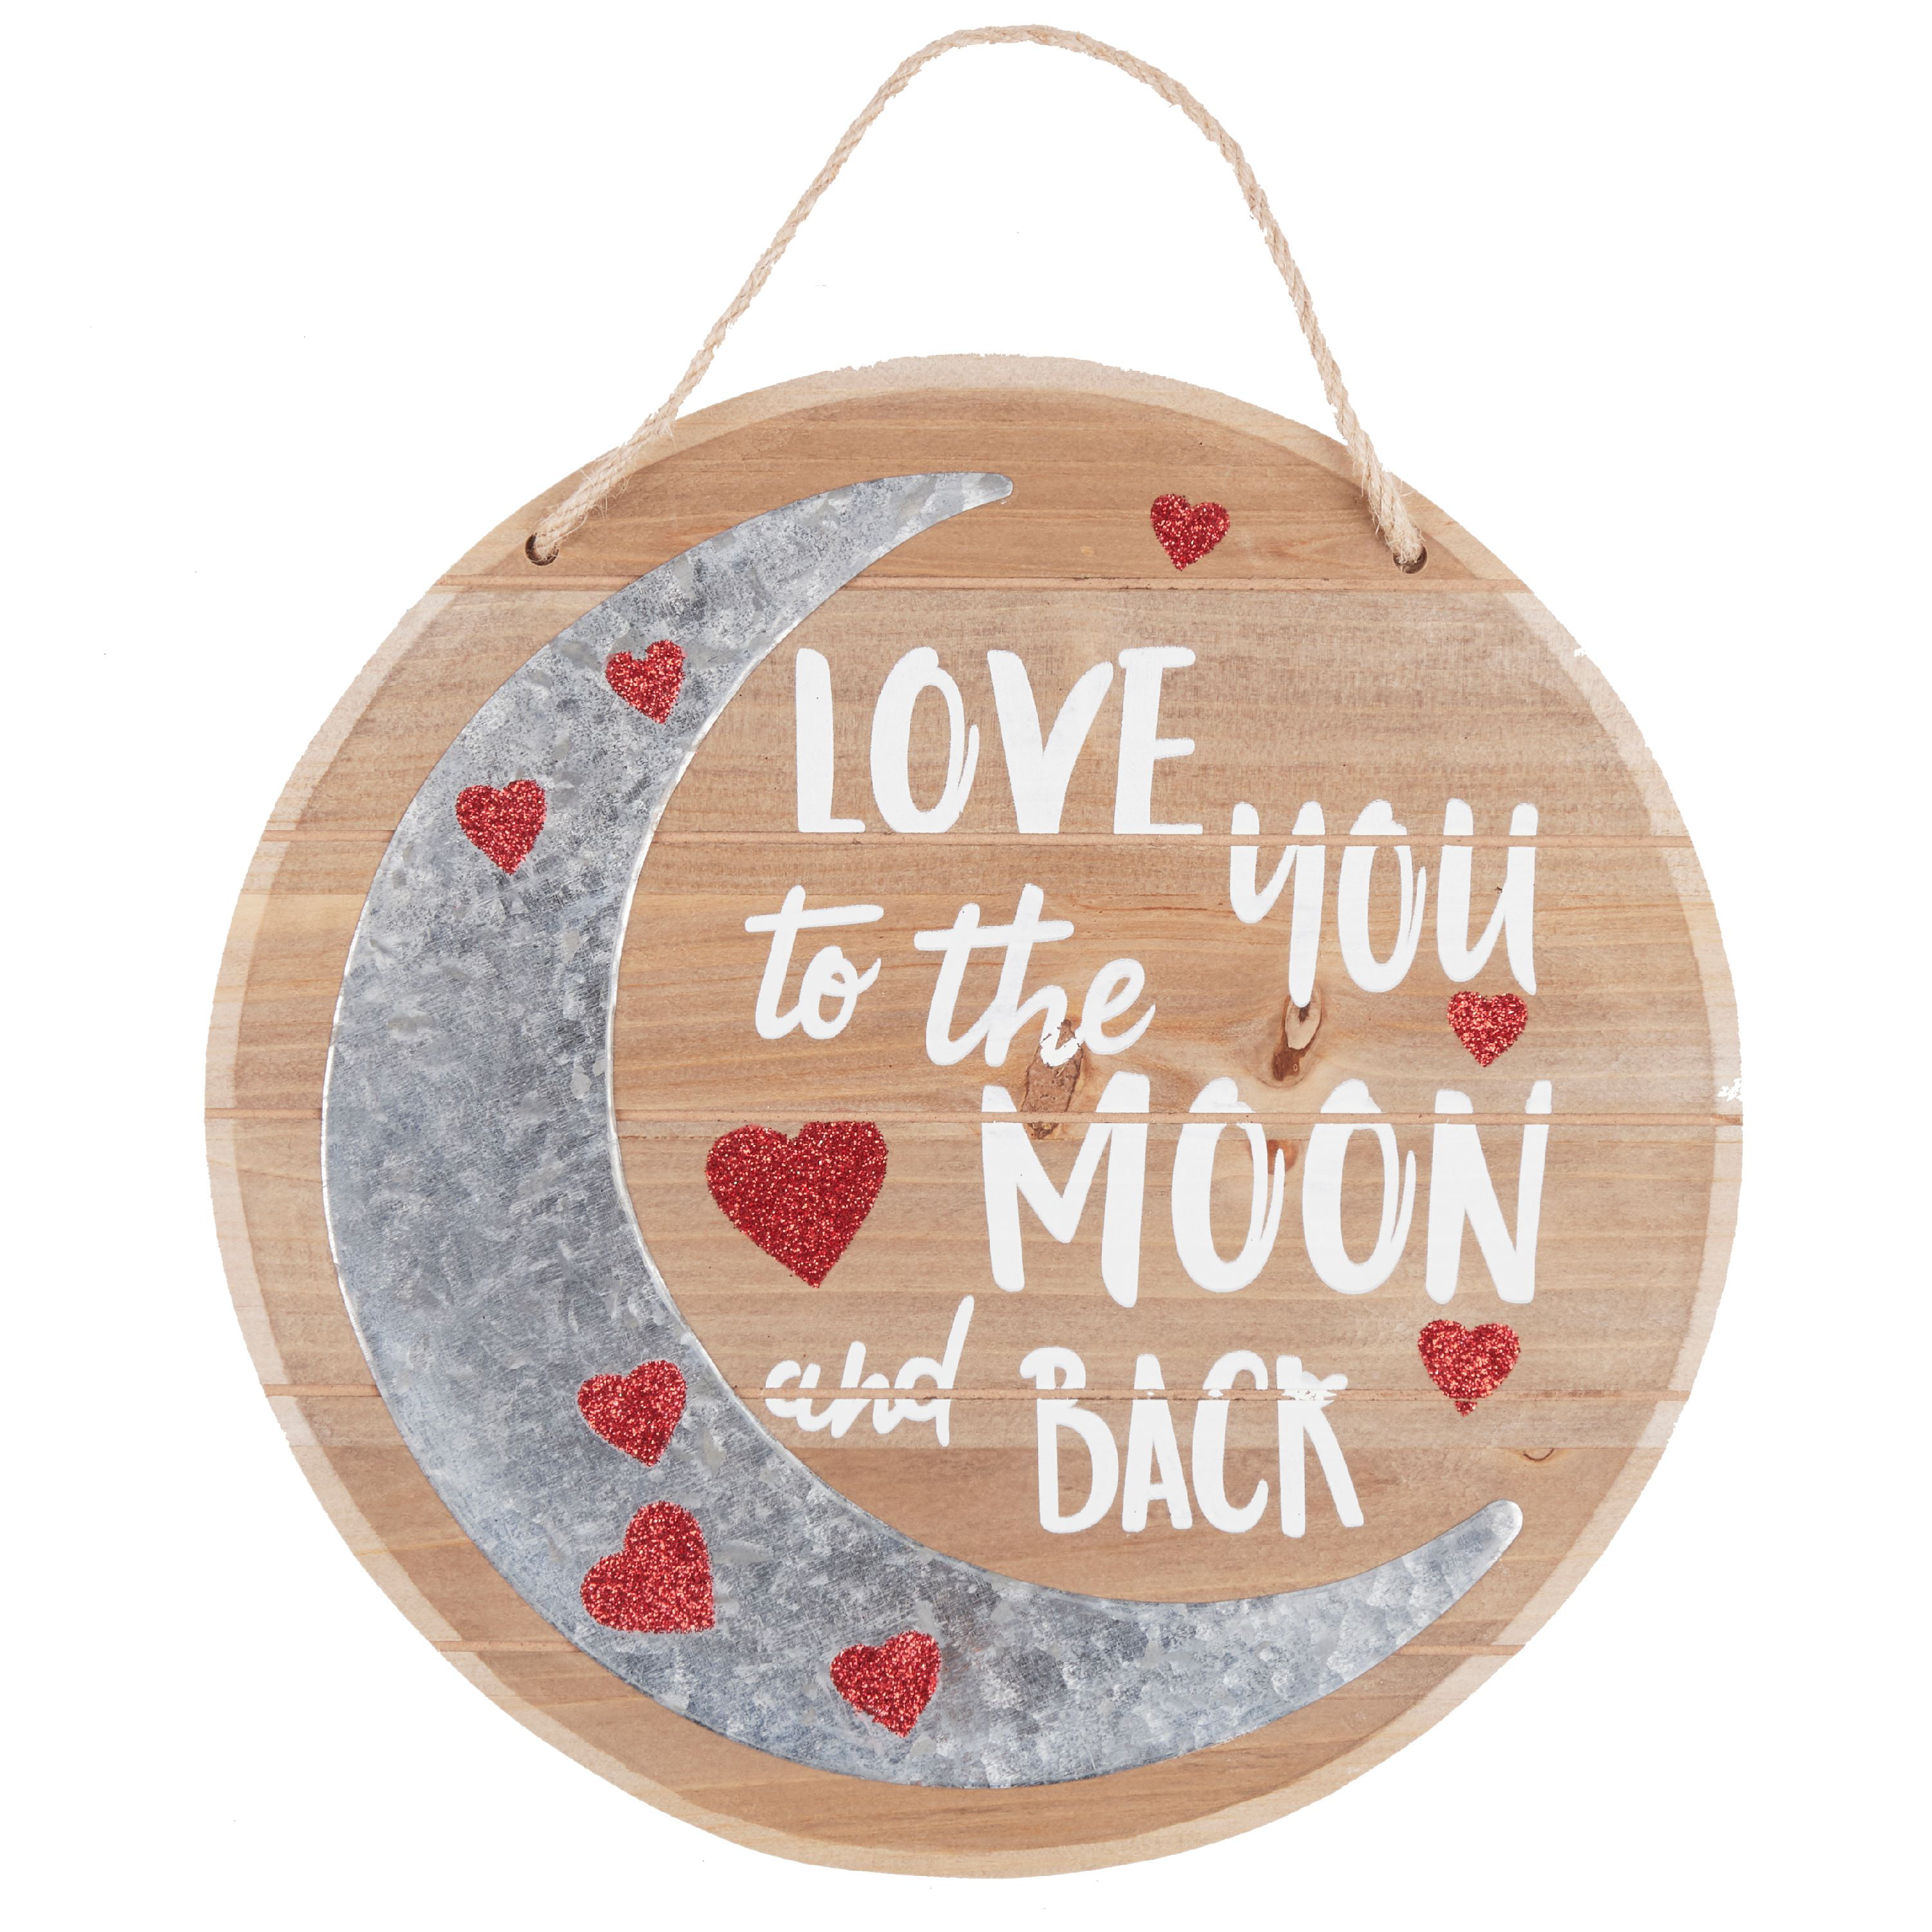 Valentine's Day Wall Door Hanging Sign TO THE MOON AND BACK Decor 11"x 11"